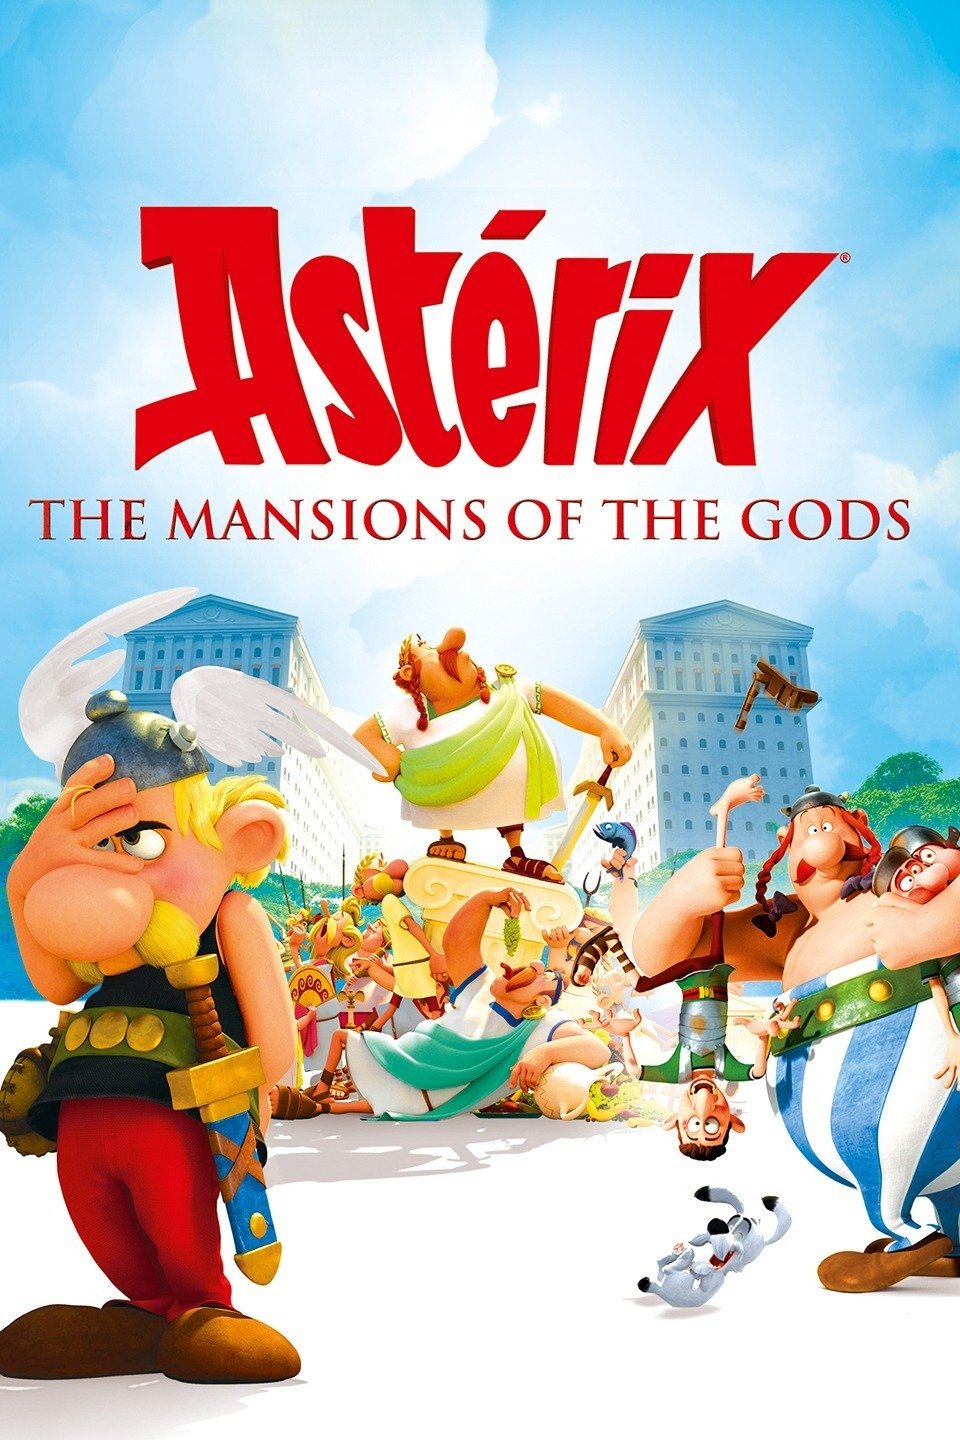 Asterix: The Mansions of the Gods Pictures - Rotten Tomatoes